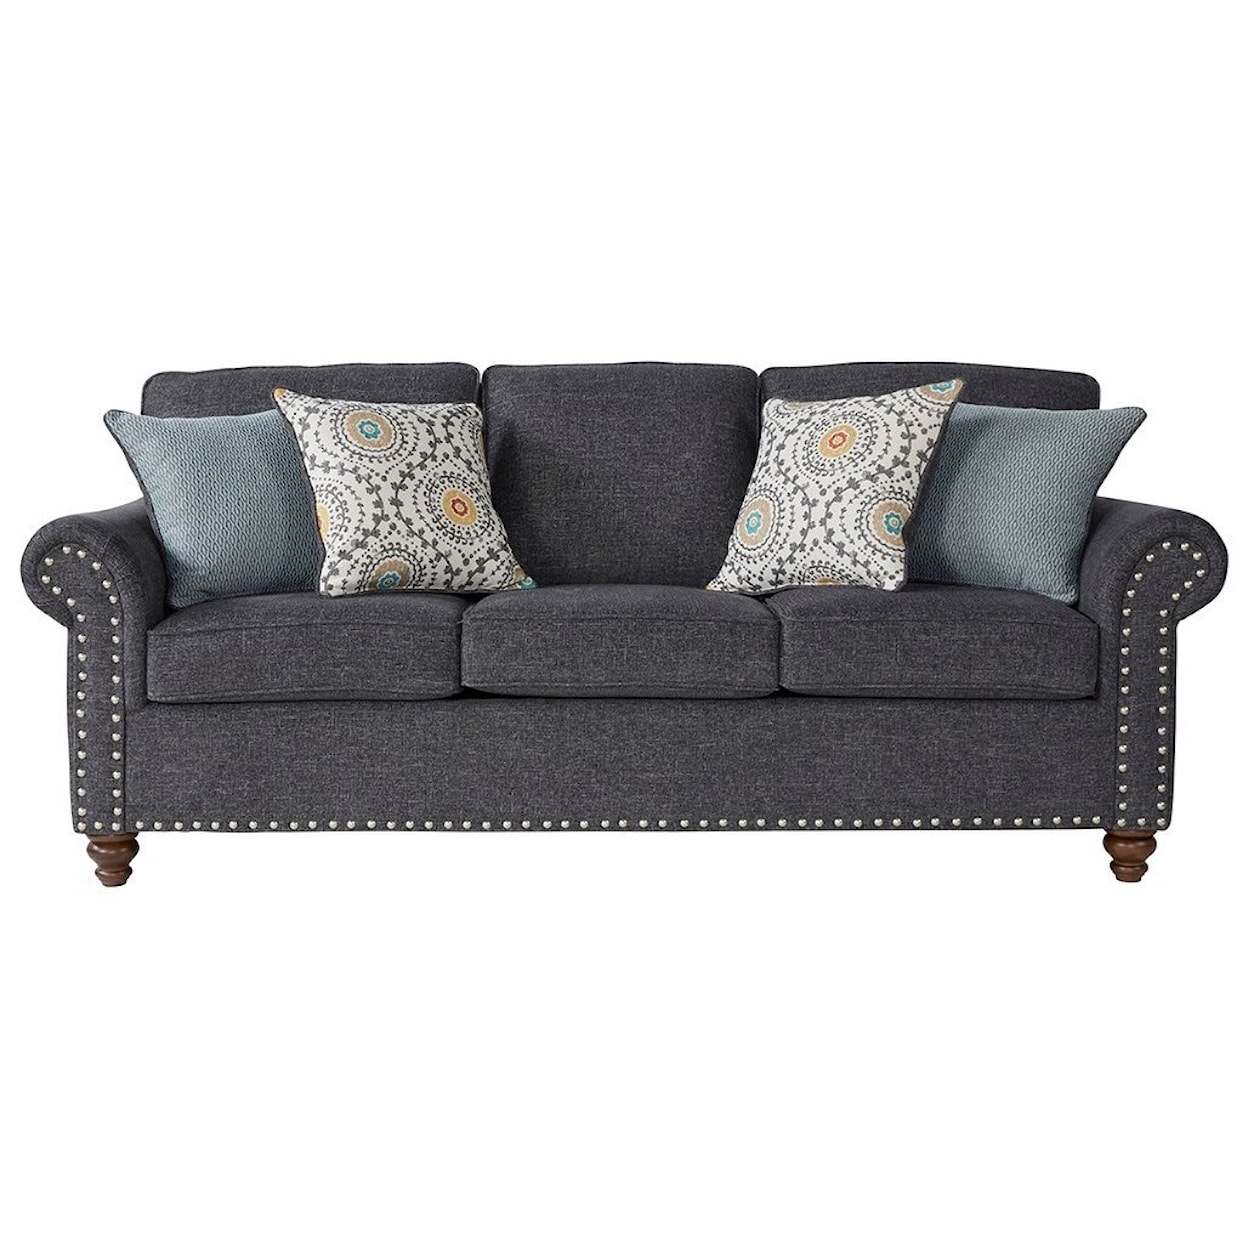 Serta Upholstery by Hughes Furniture 17655 Traditional Sofa